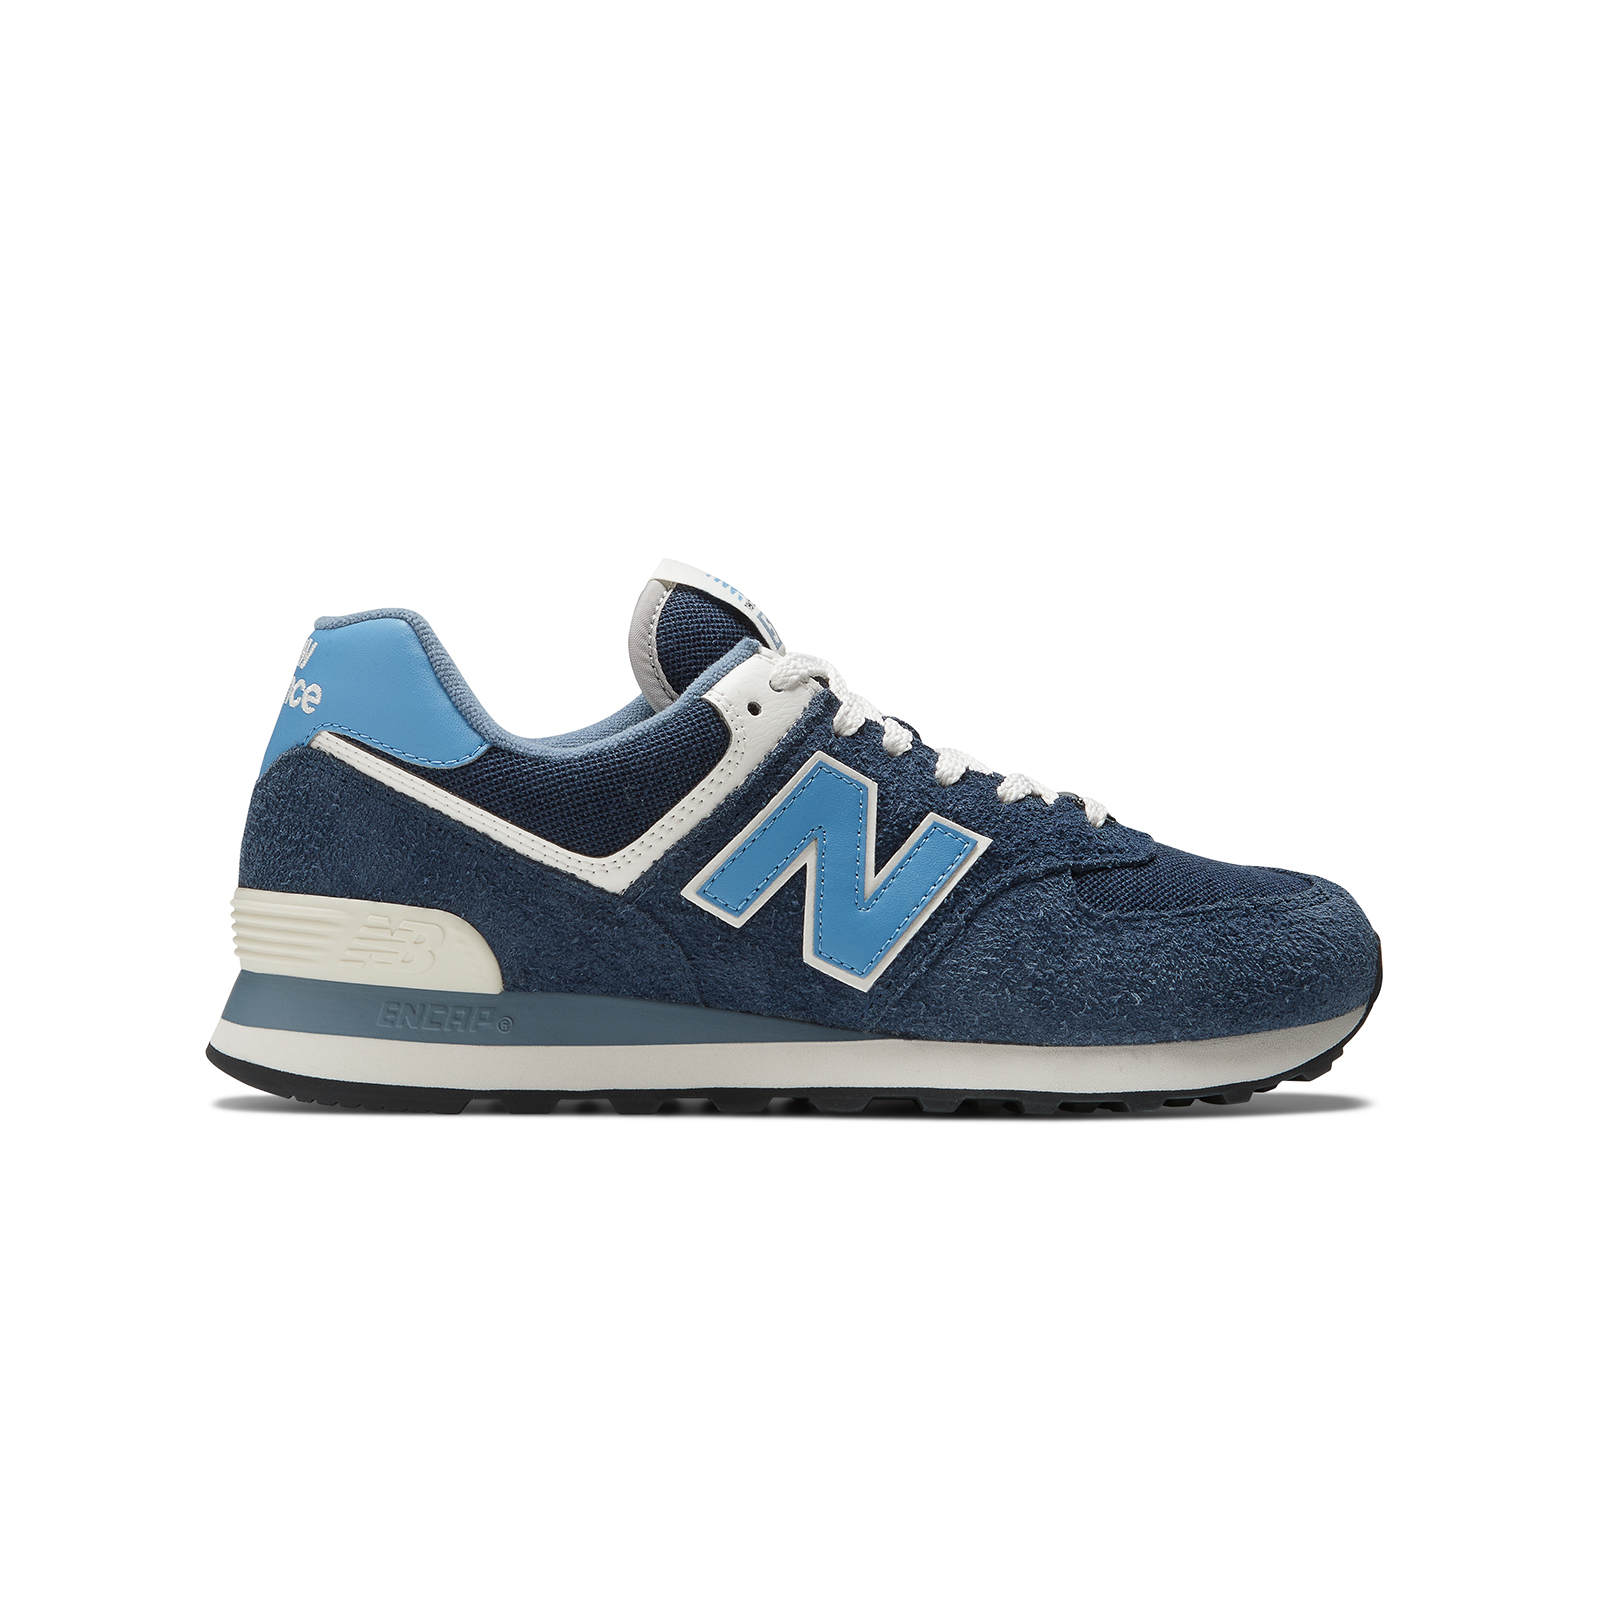 New balance ls - SHOES CLASSIC RUNNING - BLUE NAVY Ανδρικά > Παπούτσια > Sneaker > Παπούτσι Low Cut